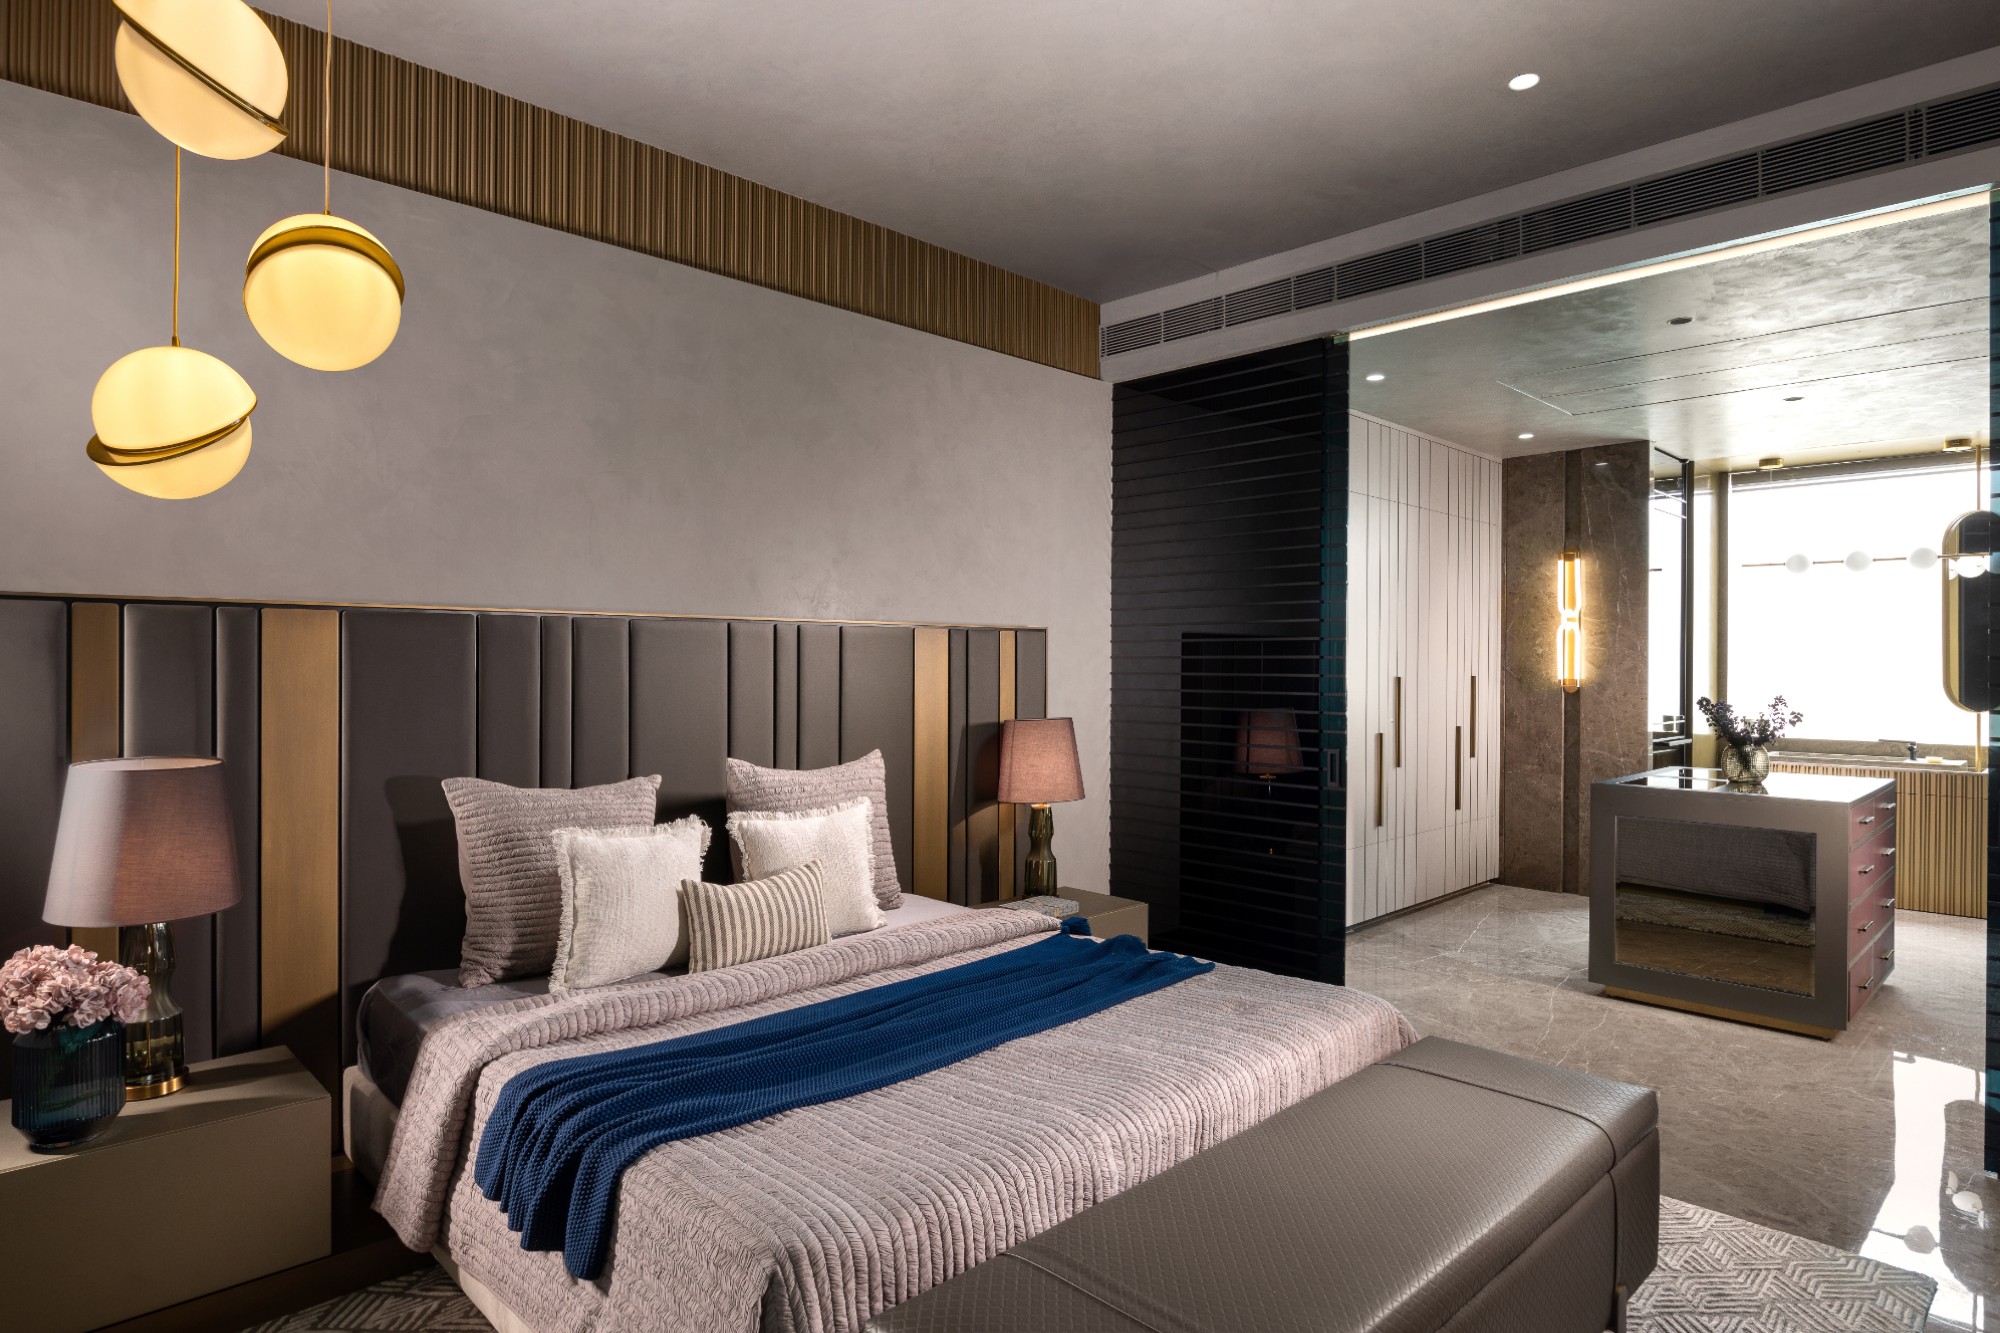 Azure Interiors set the tone with bedroom collection